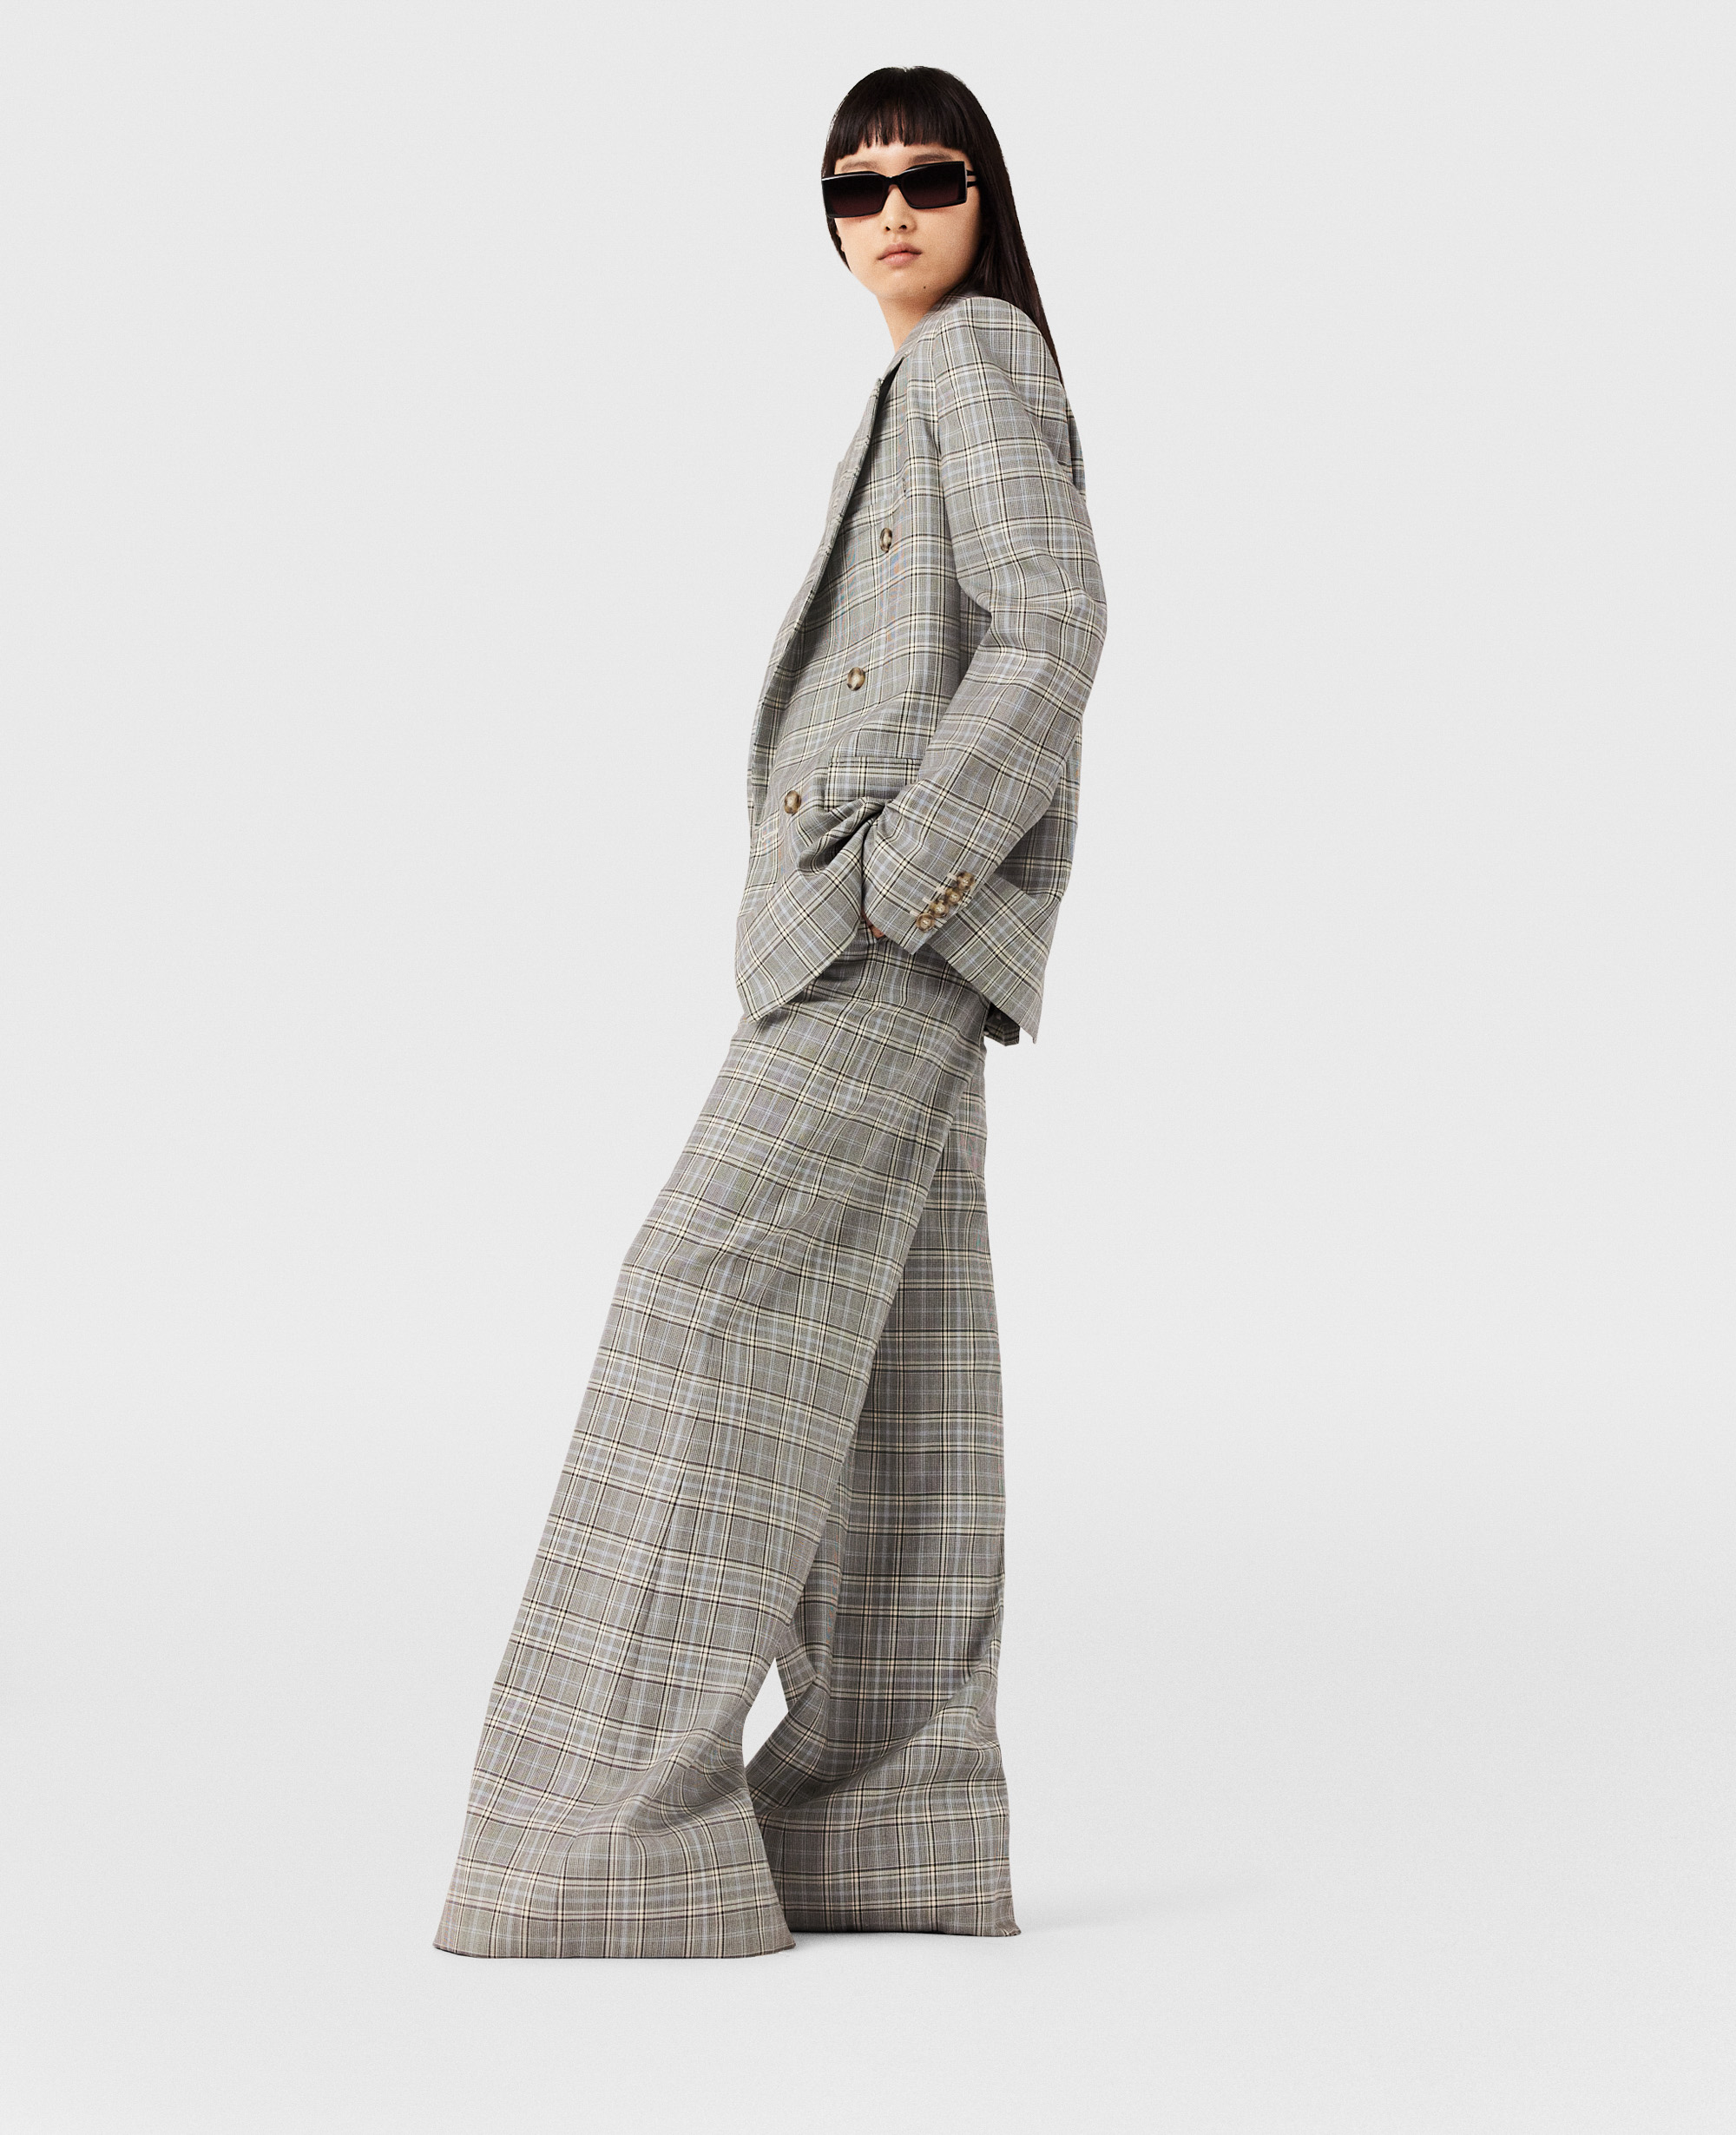 Stella Mccartney High-rise Wide-leg Wool Pants In Gray And Blue Check